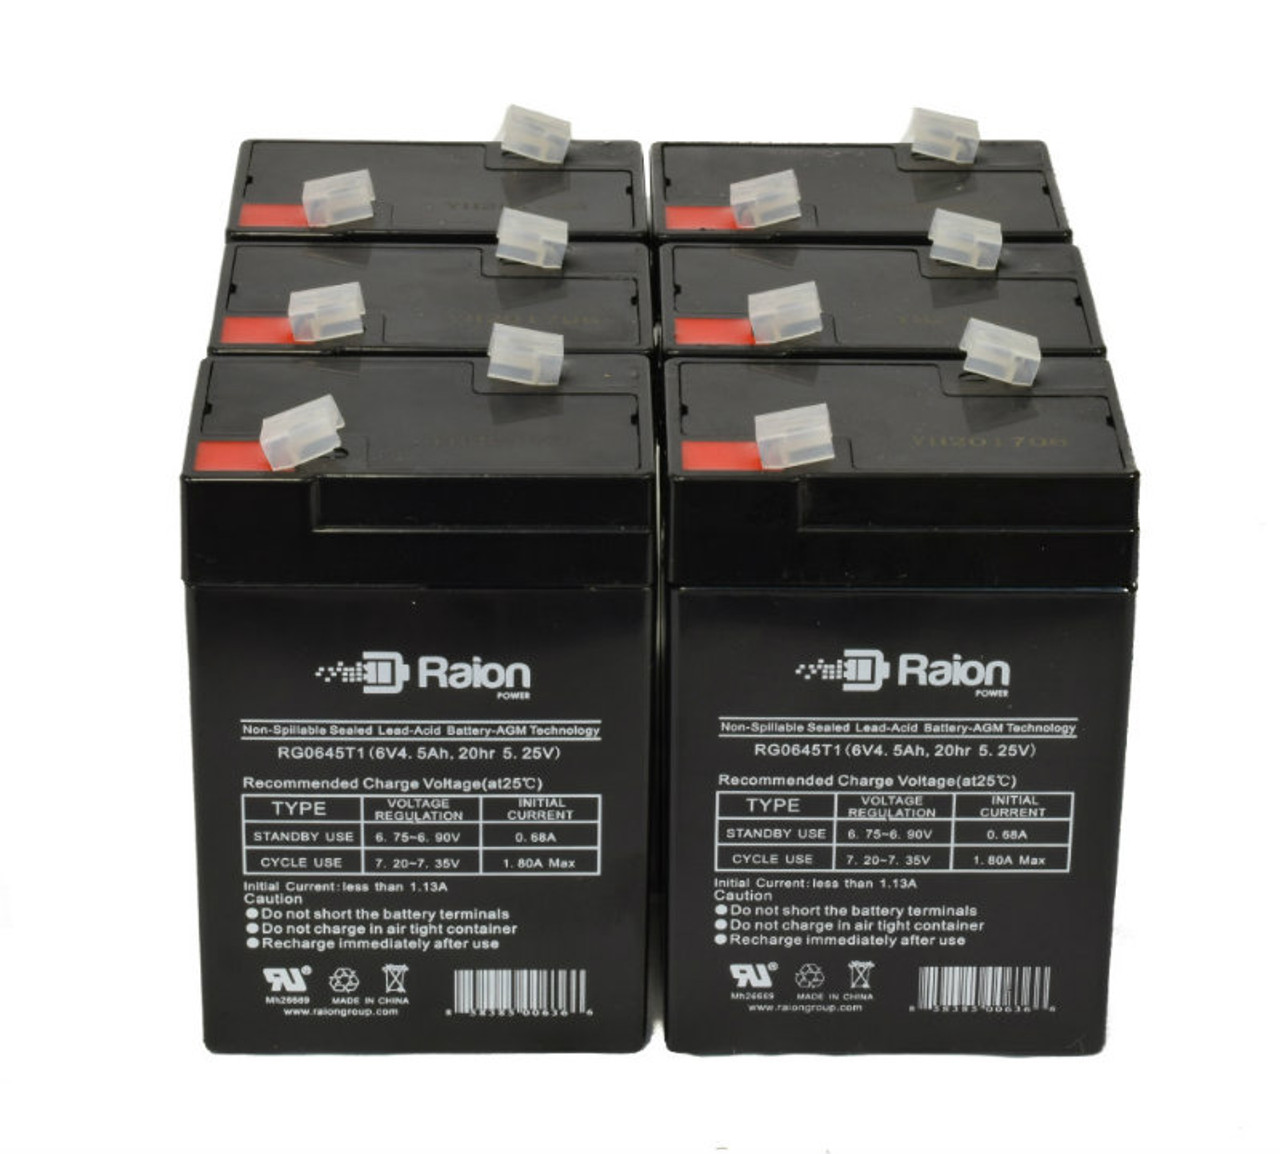 Raion Power 6 Volt 4.5Ah RG0645T1 Replacement Battery for Long Way LW-3FM4.5A - 6 Pack